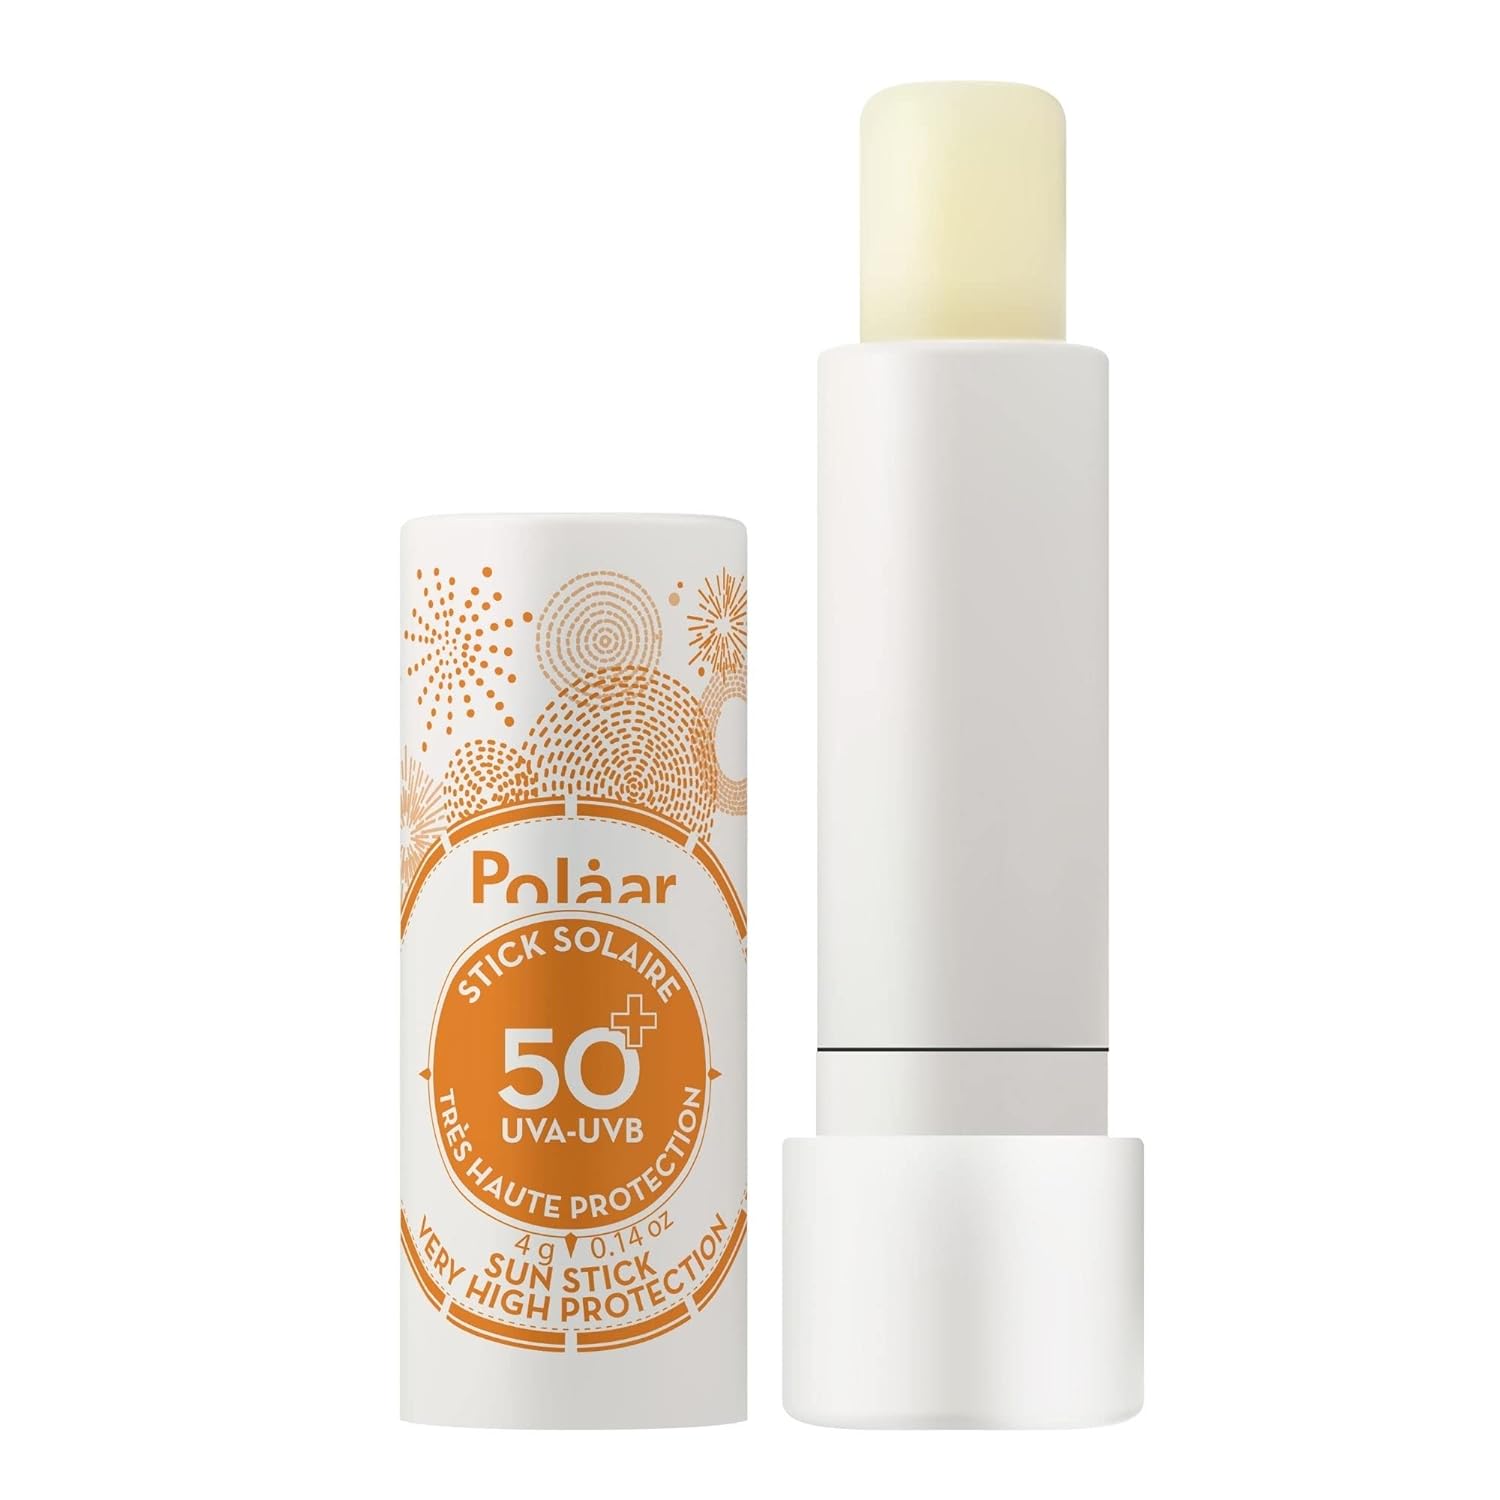 Polåar - Sun Protection Stick - Sun Cream with Very High Protection Factor SPF50+ for Lips and Sensitive Areas - Face and Body Care Without Perfume, Non-Greasy - Vegan, Made in France - 4 g